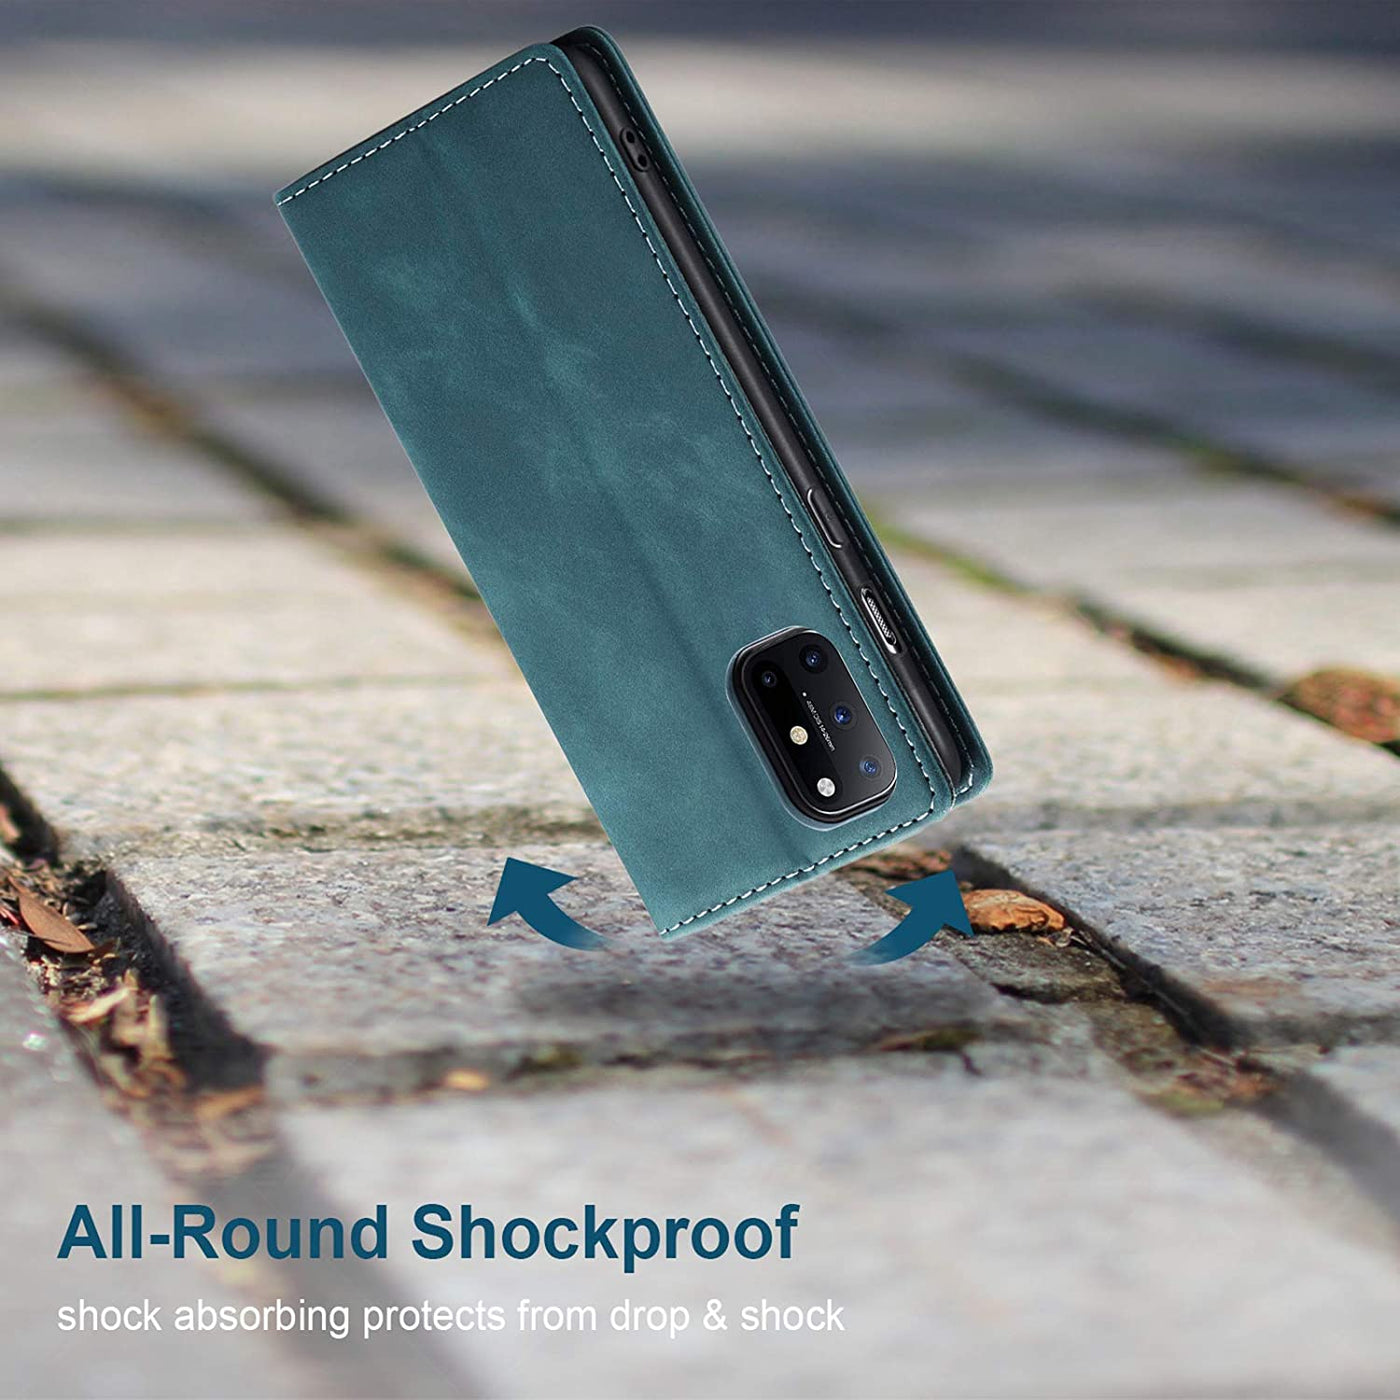 Oneplus 8T shockproof cover